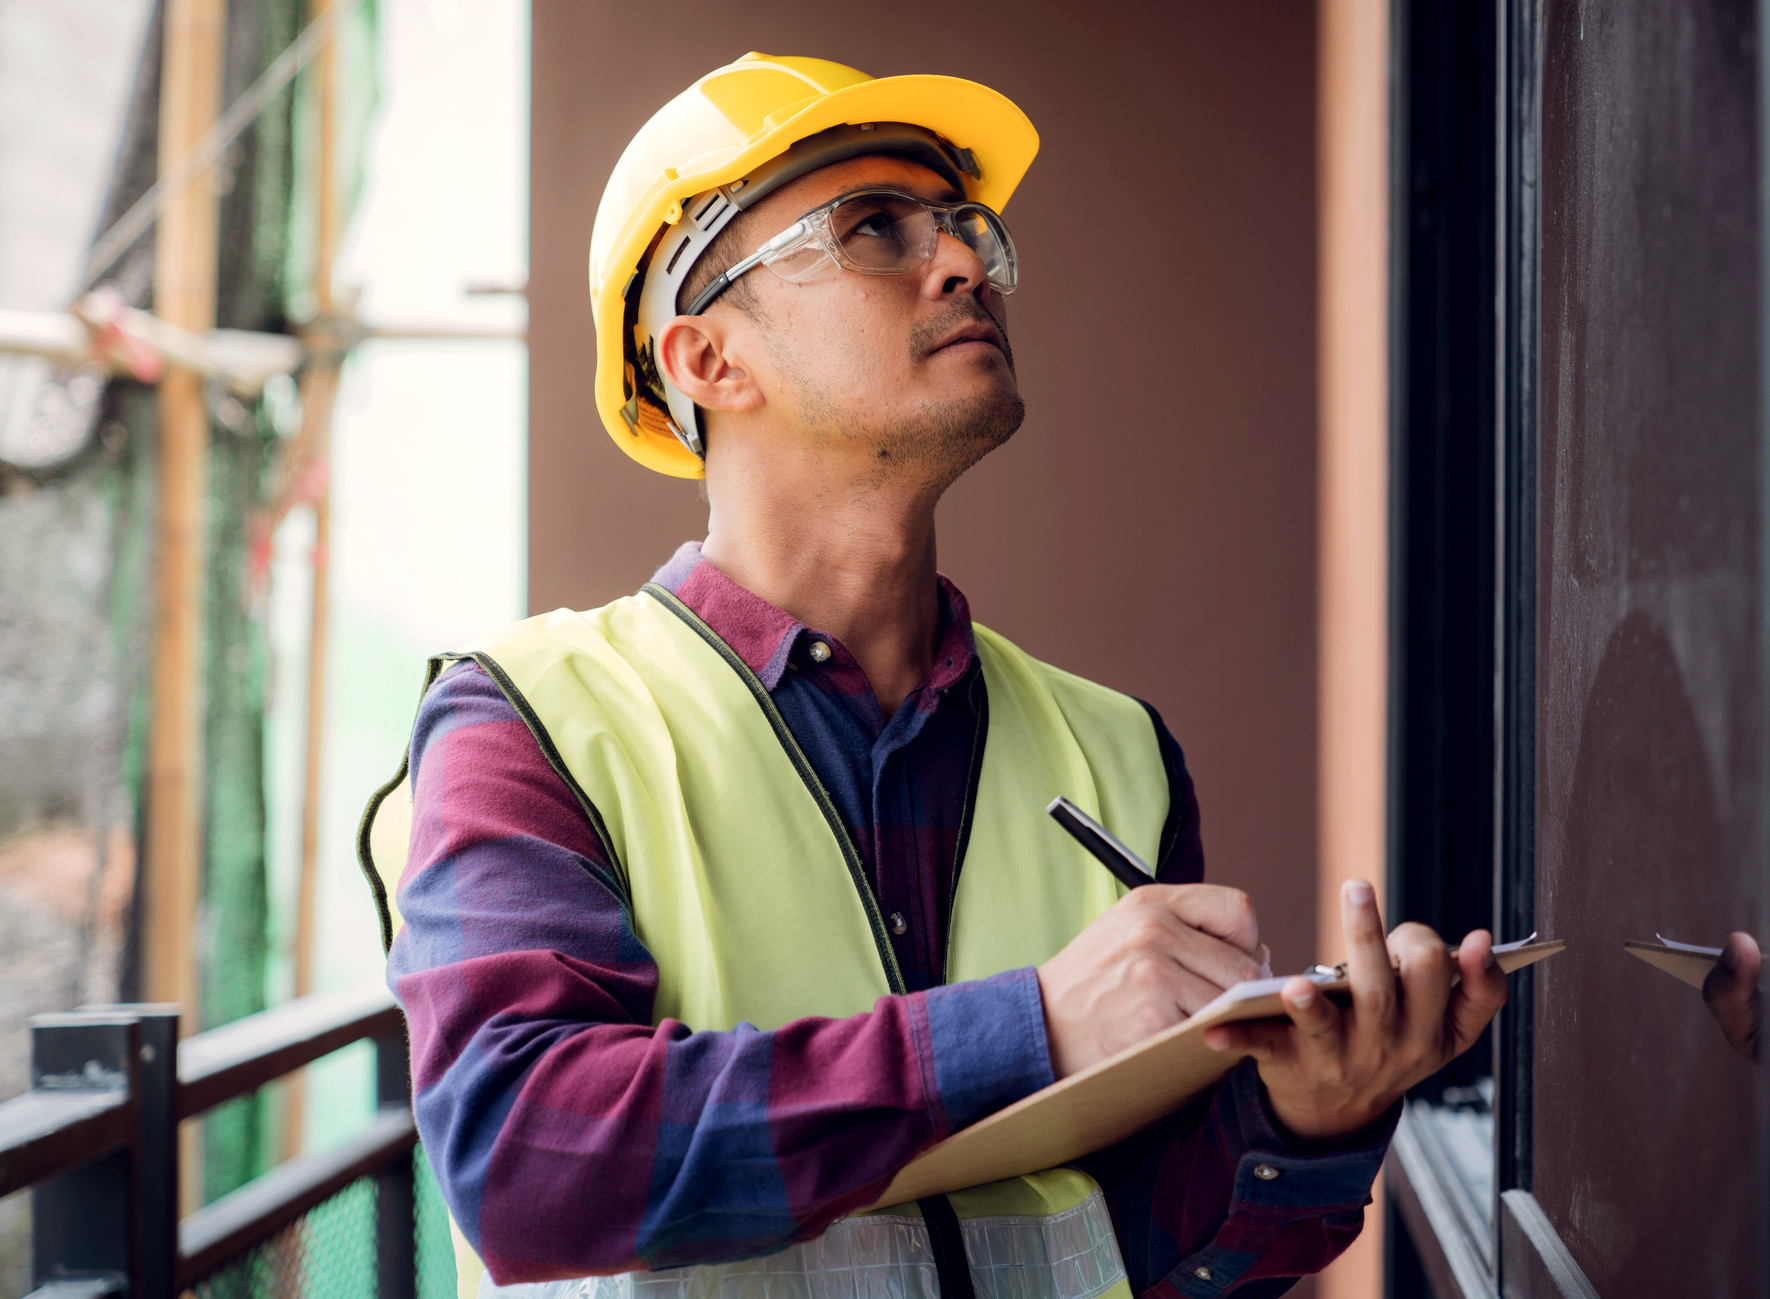 Careers in Construction: How to Become a Safety Manager